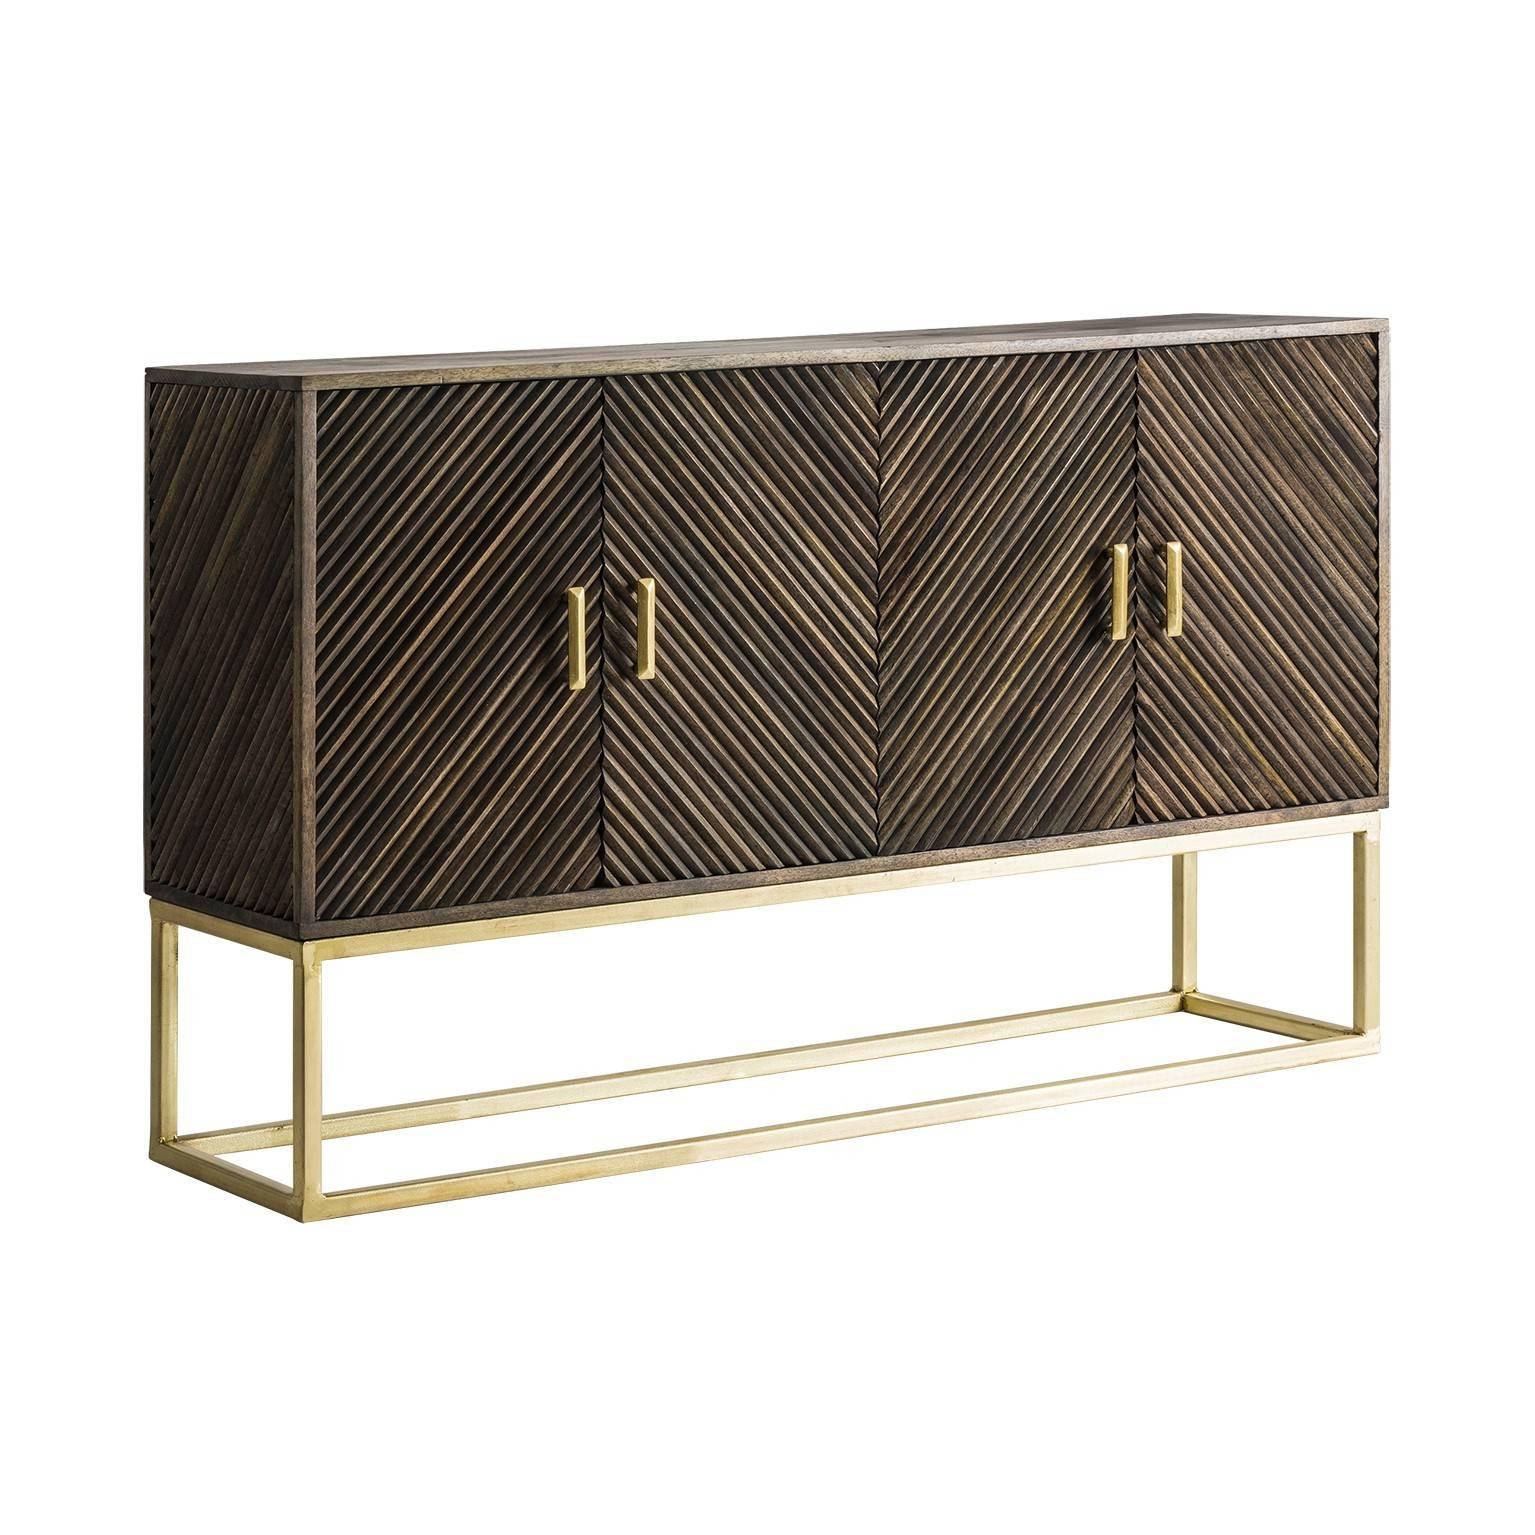 European Wooden and Iron with Gold Patina Sideboard